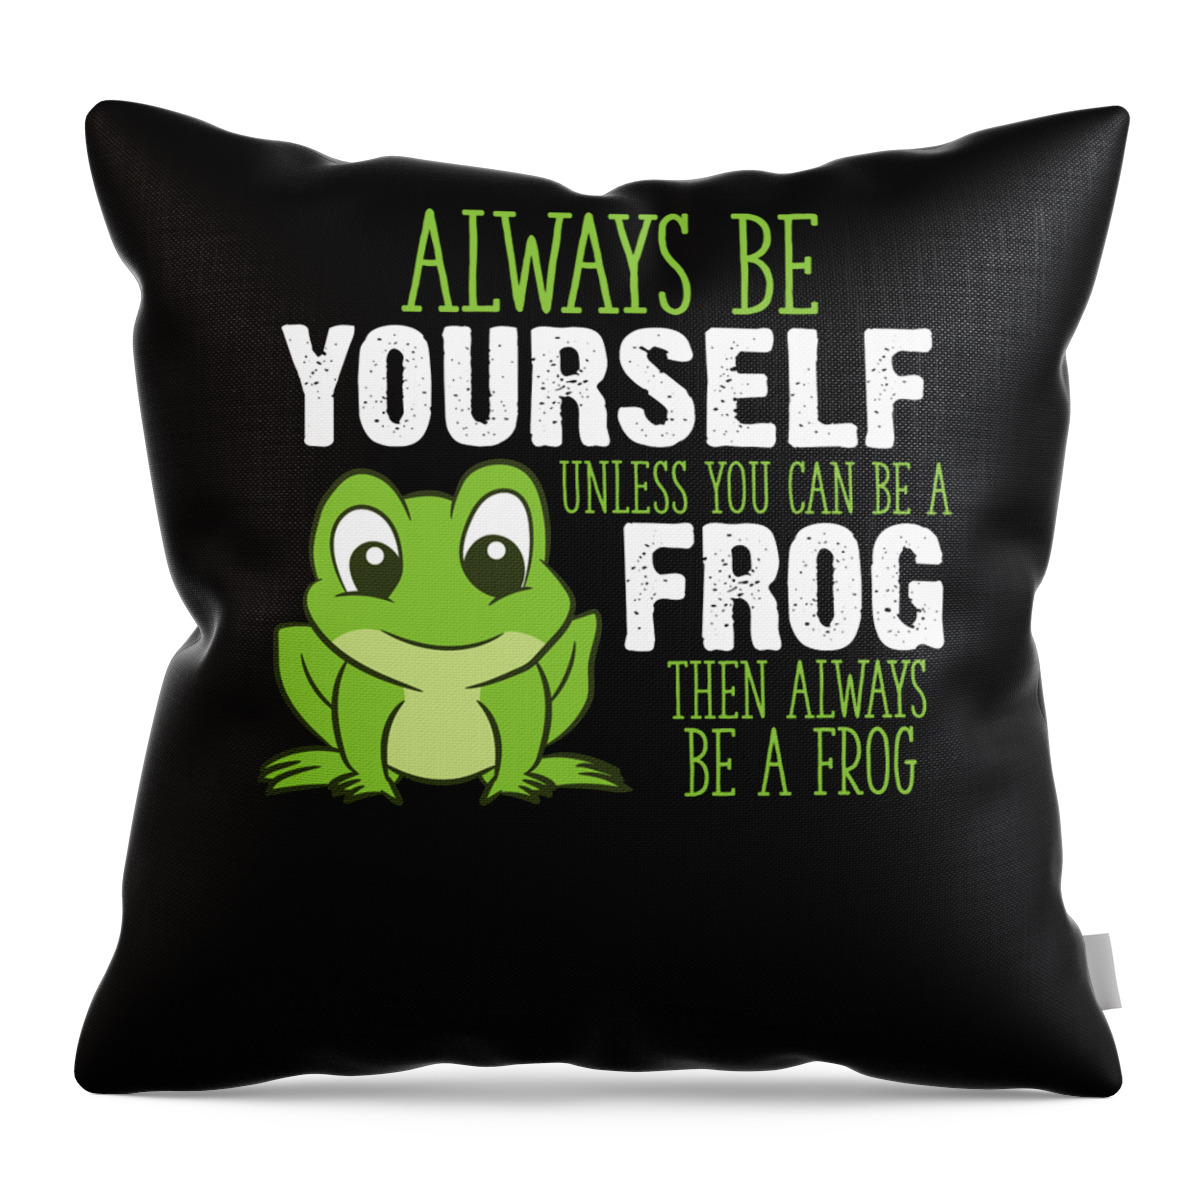 Frog Gifts Always Be Yourself Unless You Can Be A Frog Throw